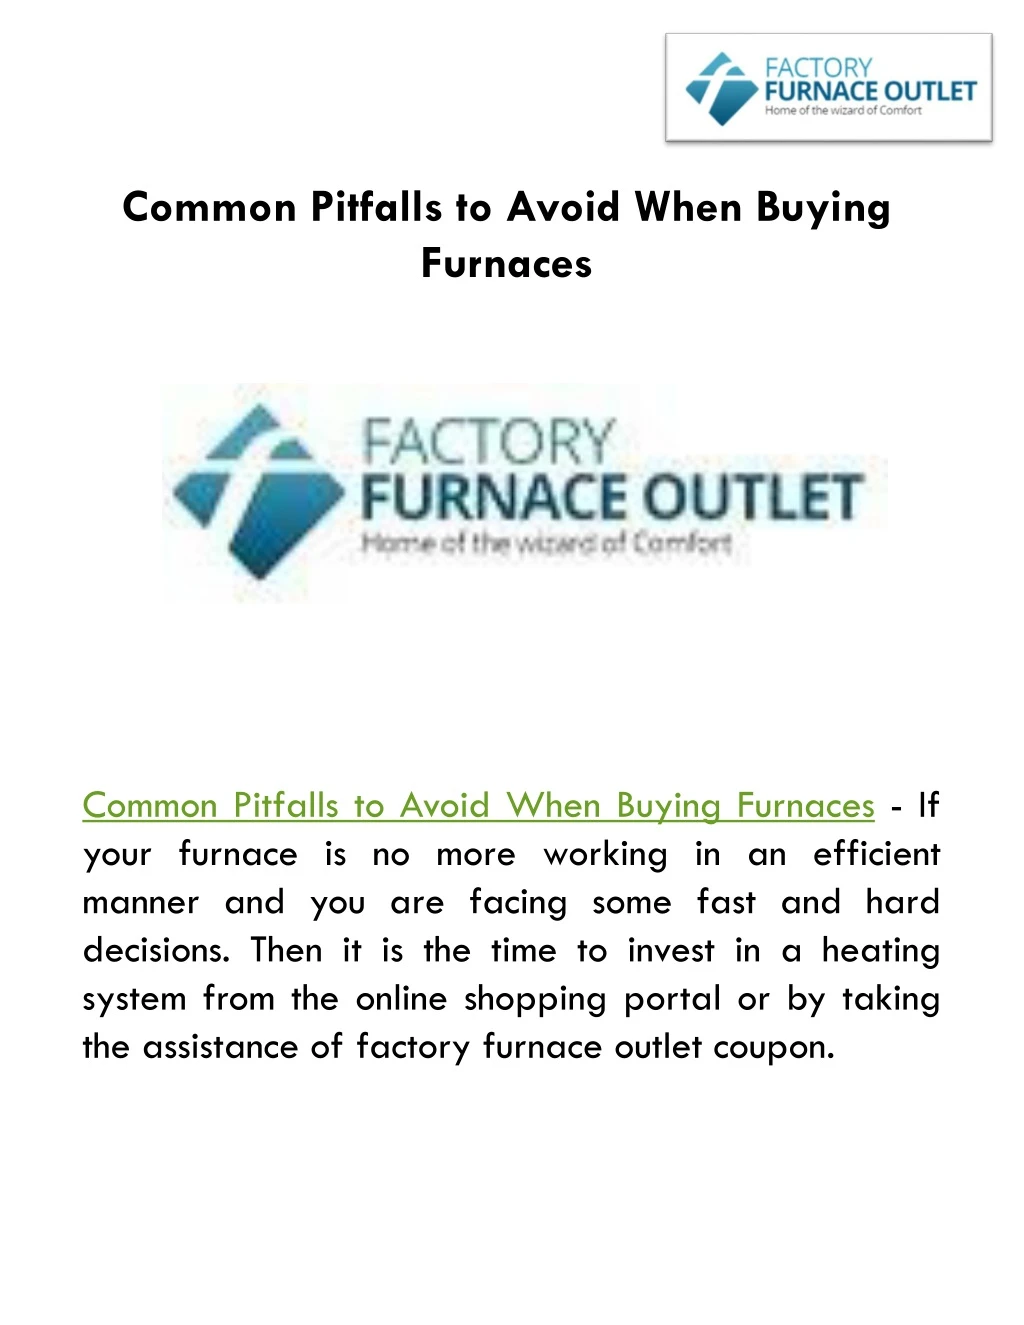 common pitfalls to avoid when buying furnaces